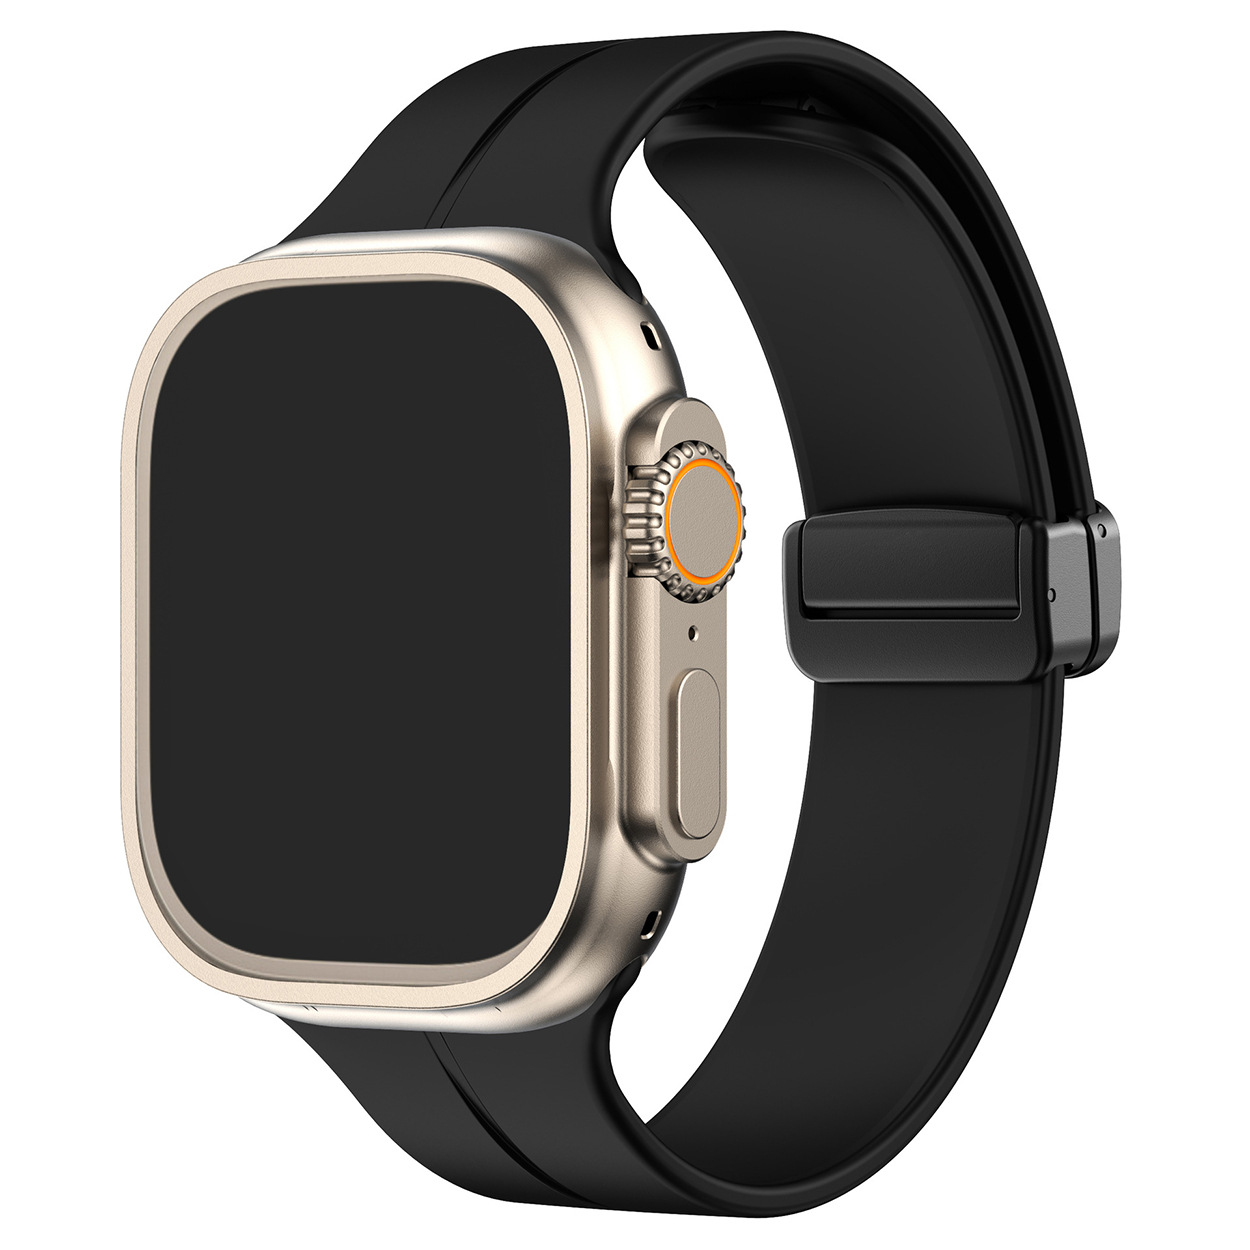 FlexiFit Magnetic Band for Apple Watch